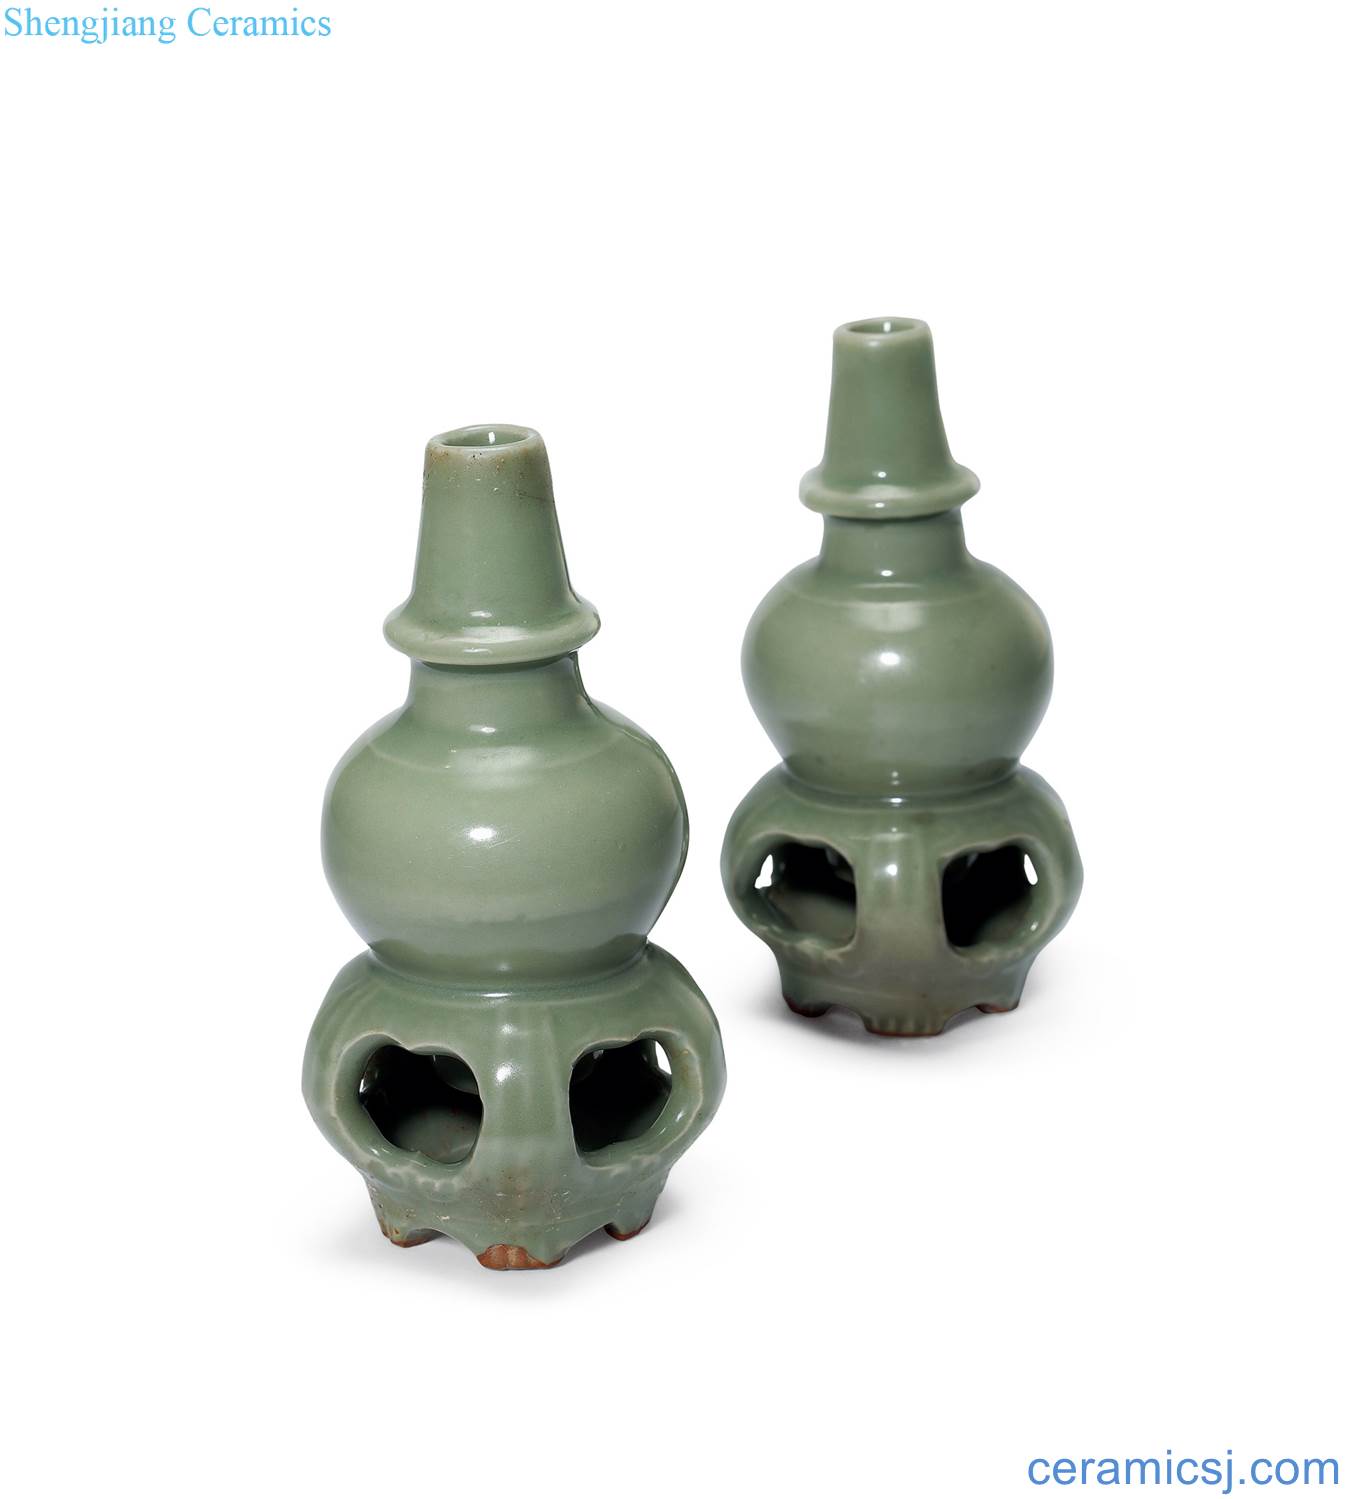 Southern song dynasty, yuan Longquan celadon even a bottle of (a)